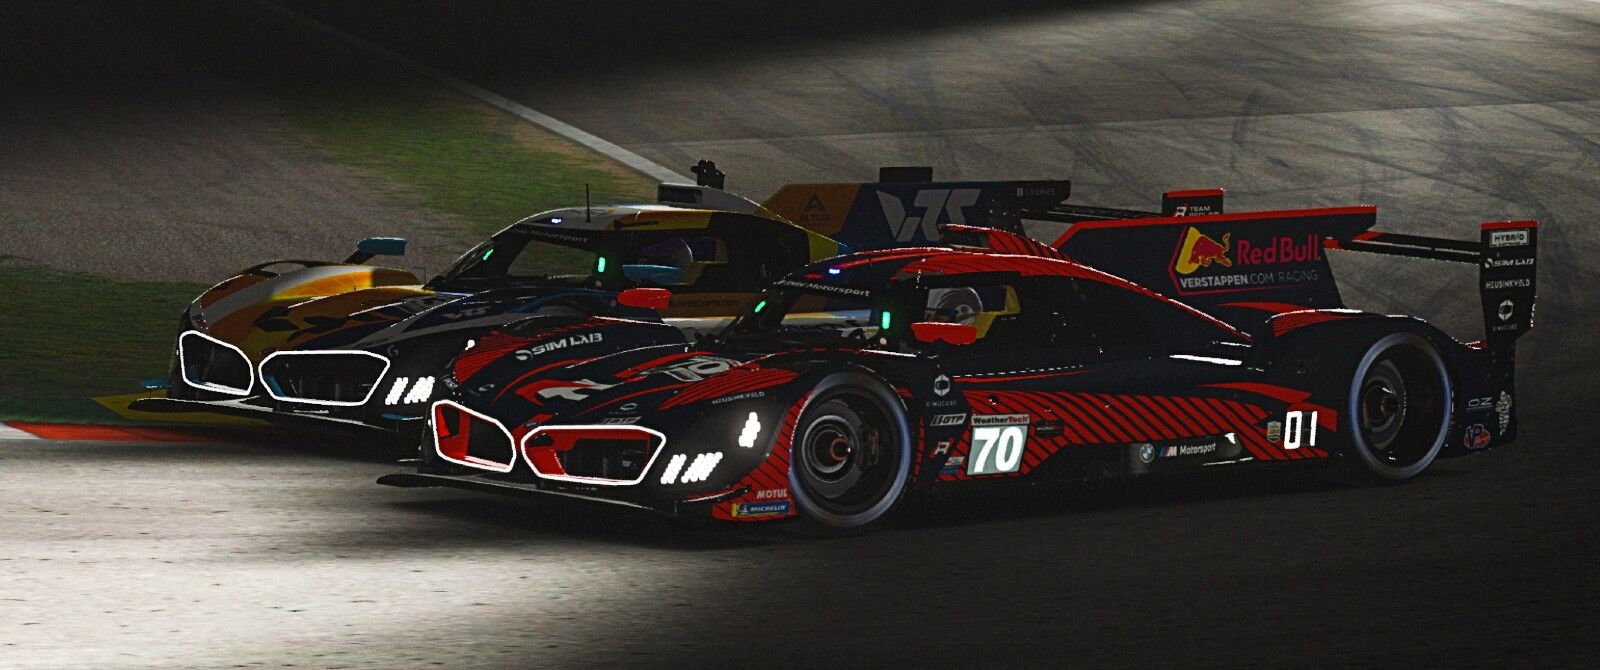 Two low slung bespoke racing cars side by side at nighttime on a racing track.